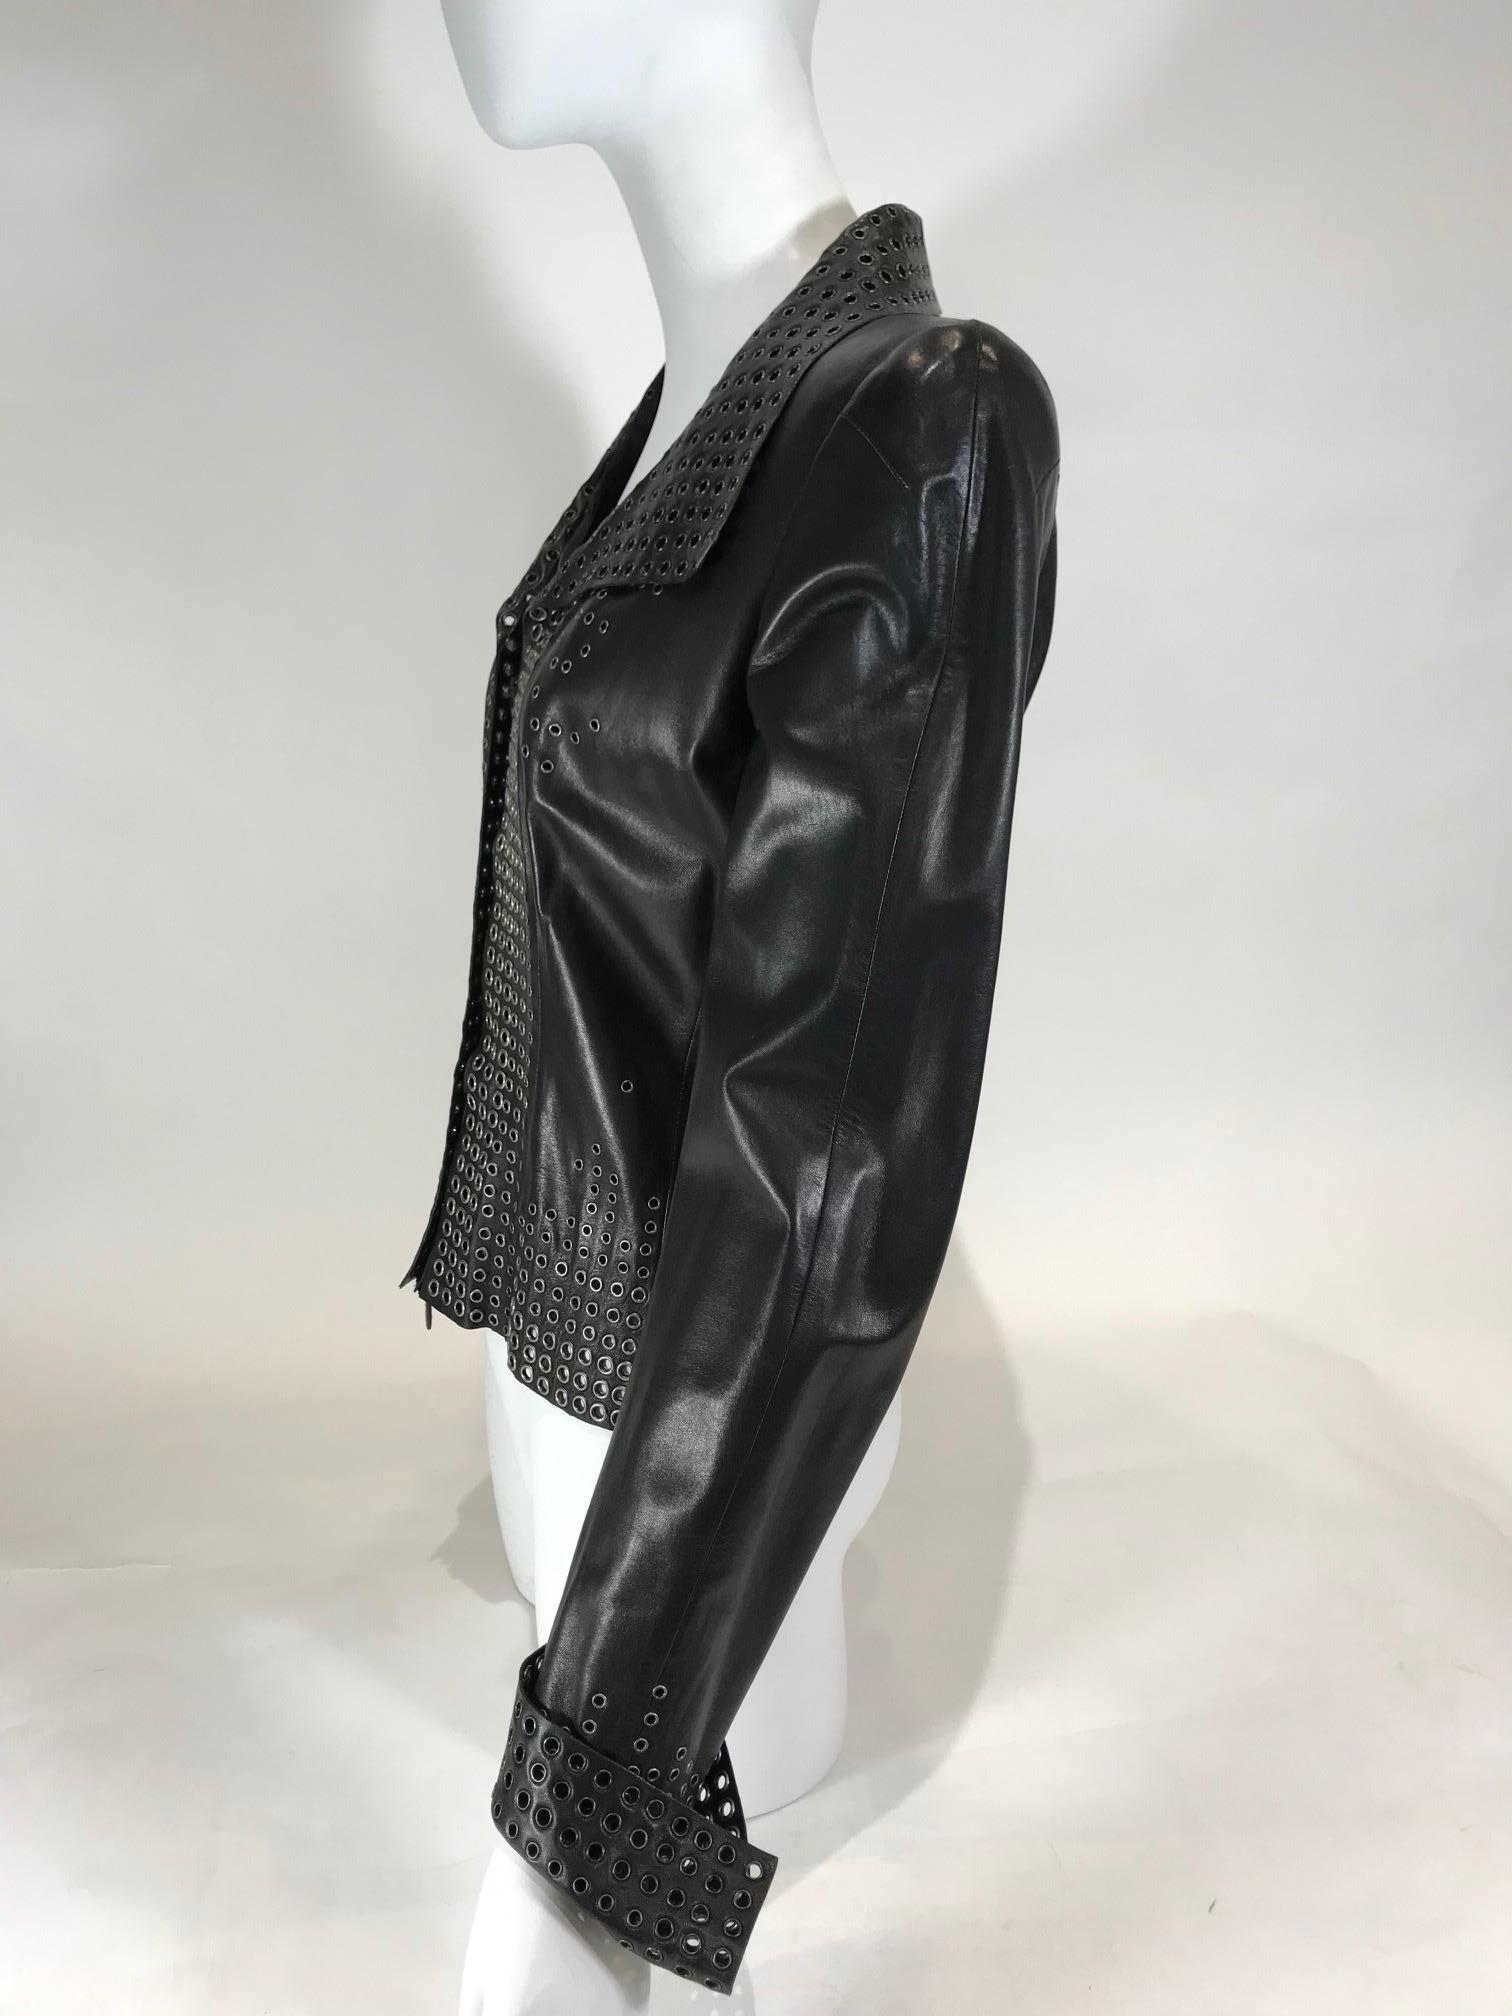 Alexander McQueen Grommets Leather Jacket In Good Condition For Sale In Roslyn, NY